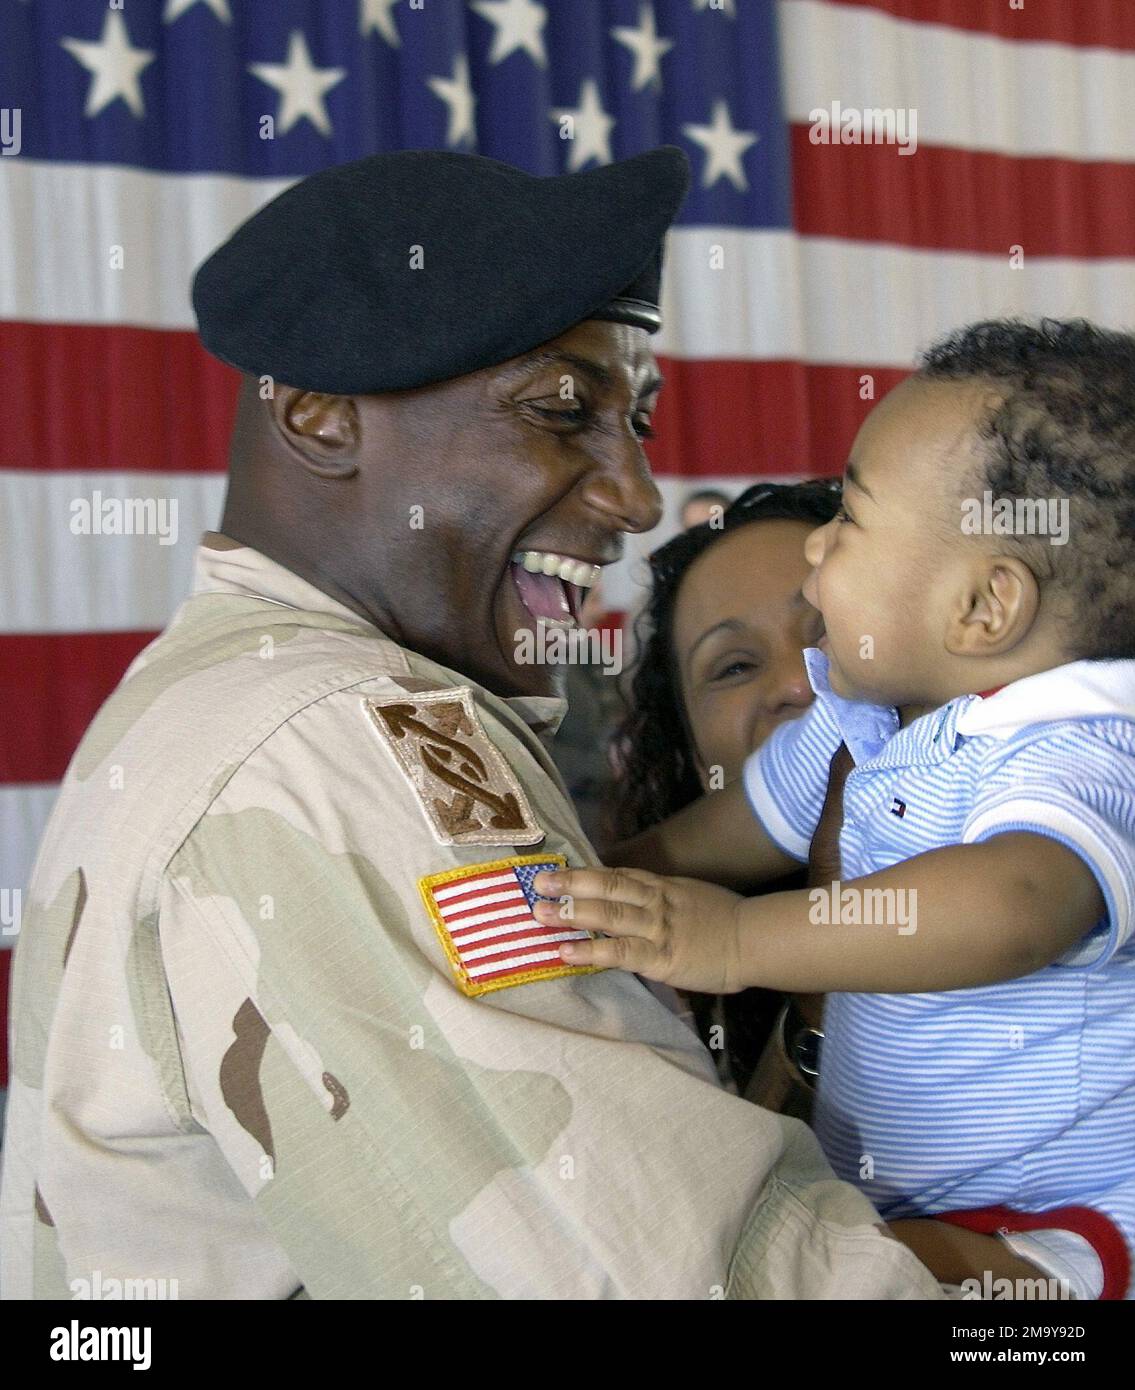 Reunion at Nellis Air Force Base, Nevada (NV), US Army (USA) Reservist STAFF Sergeant (SSG) James Smith, 257th Transportation Company (TRANS CO), Las Vegas, NV, holds his eight month old son Malik for the first time on returning home from a 13-month deployment to Kuwait and Iraq during Operation IRAQI FREEDOM. Subject Operation/Series: IRAQI FREEDOM Base: Nellis Air Force Base State: Nevada (NV) Country: United States Of America (USA) Stock Photo